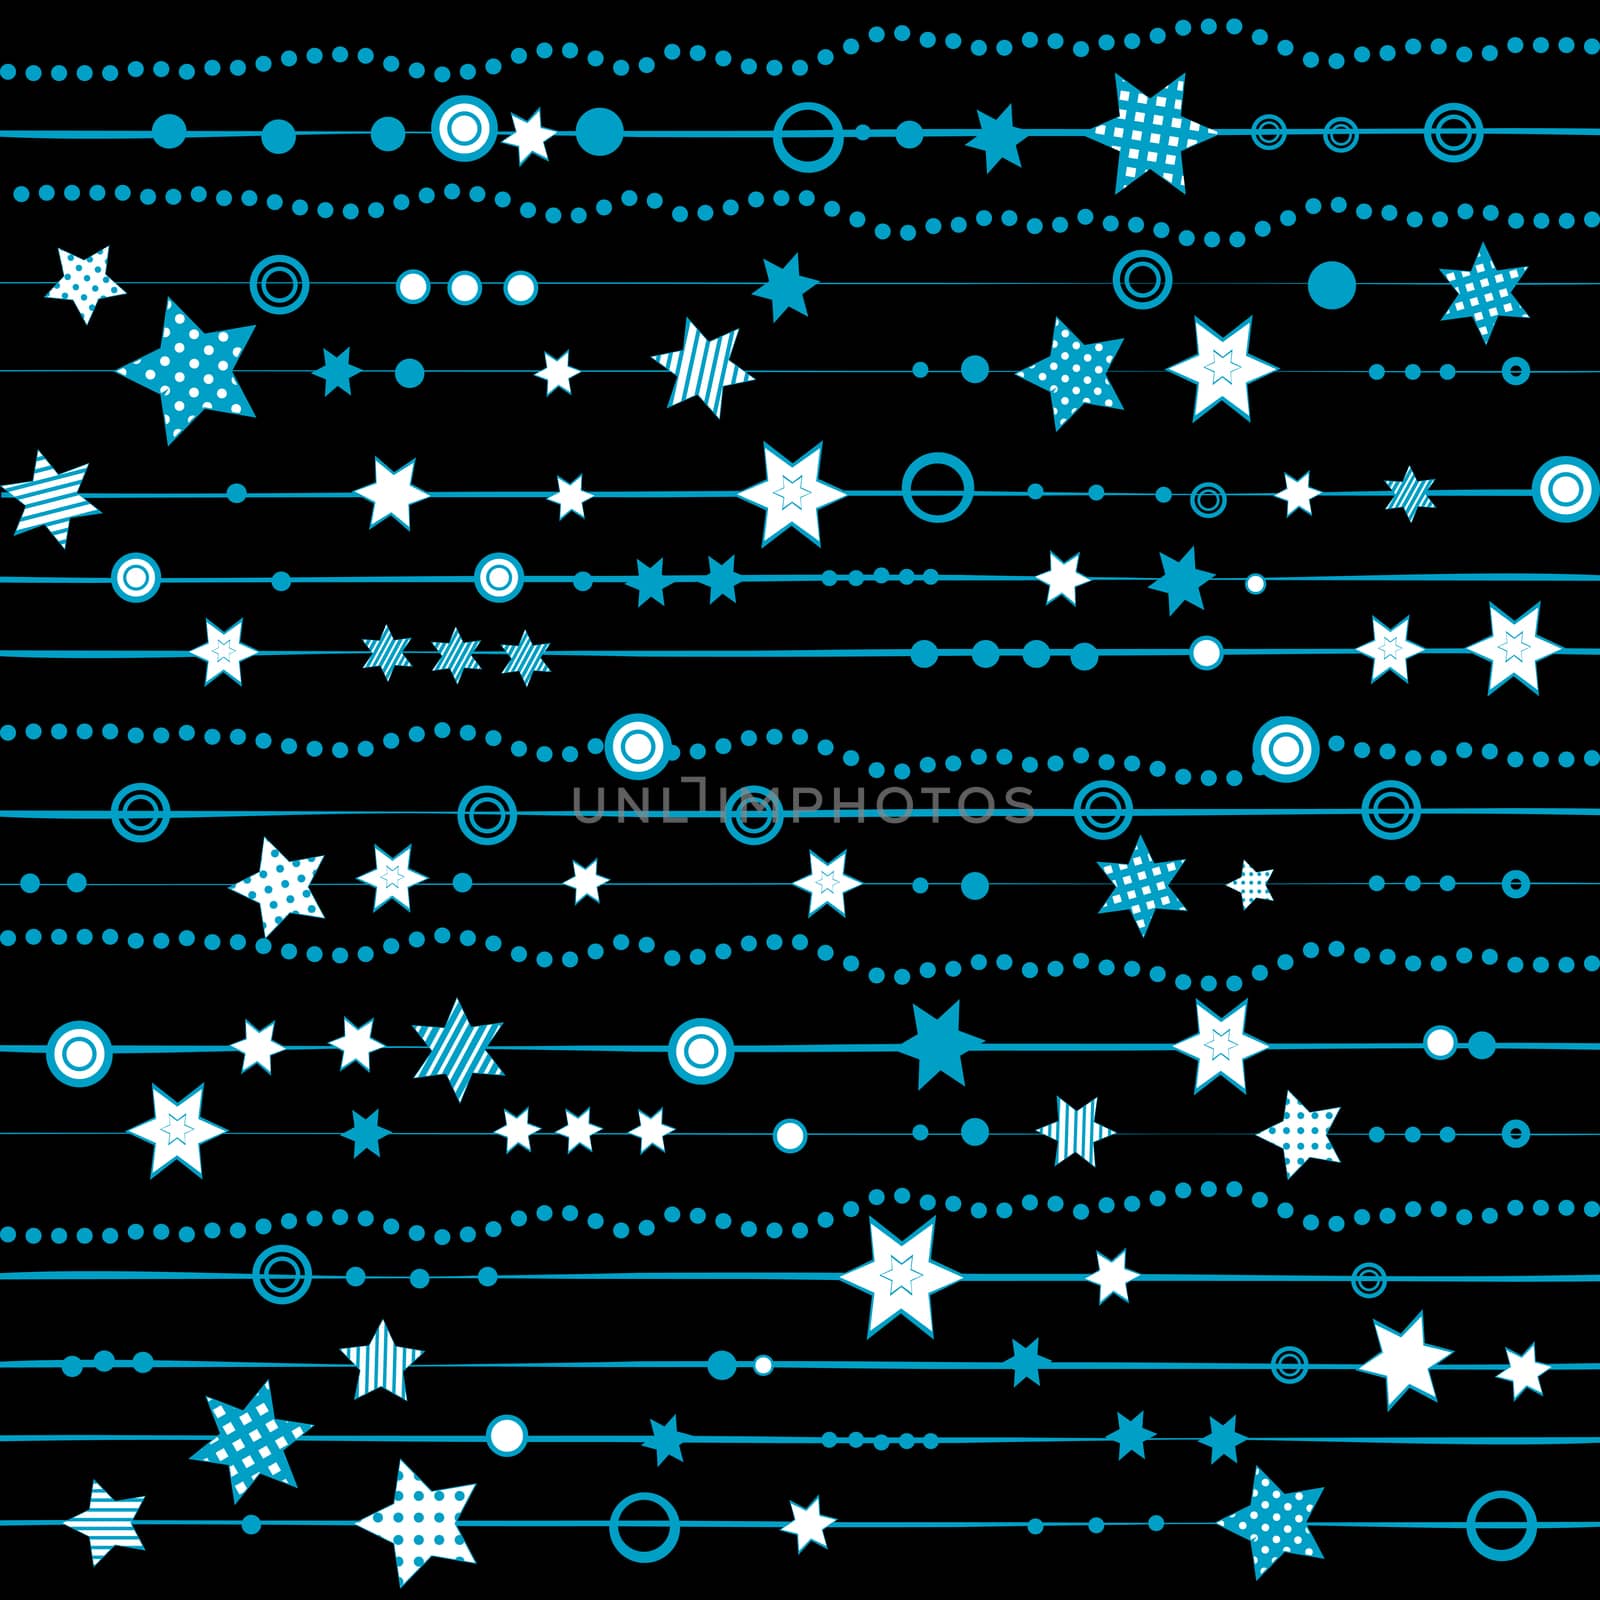 Blue garland with stars and dots over black background by hibrida13